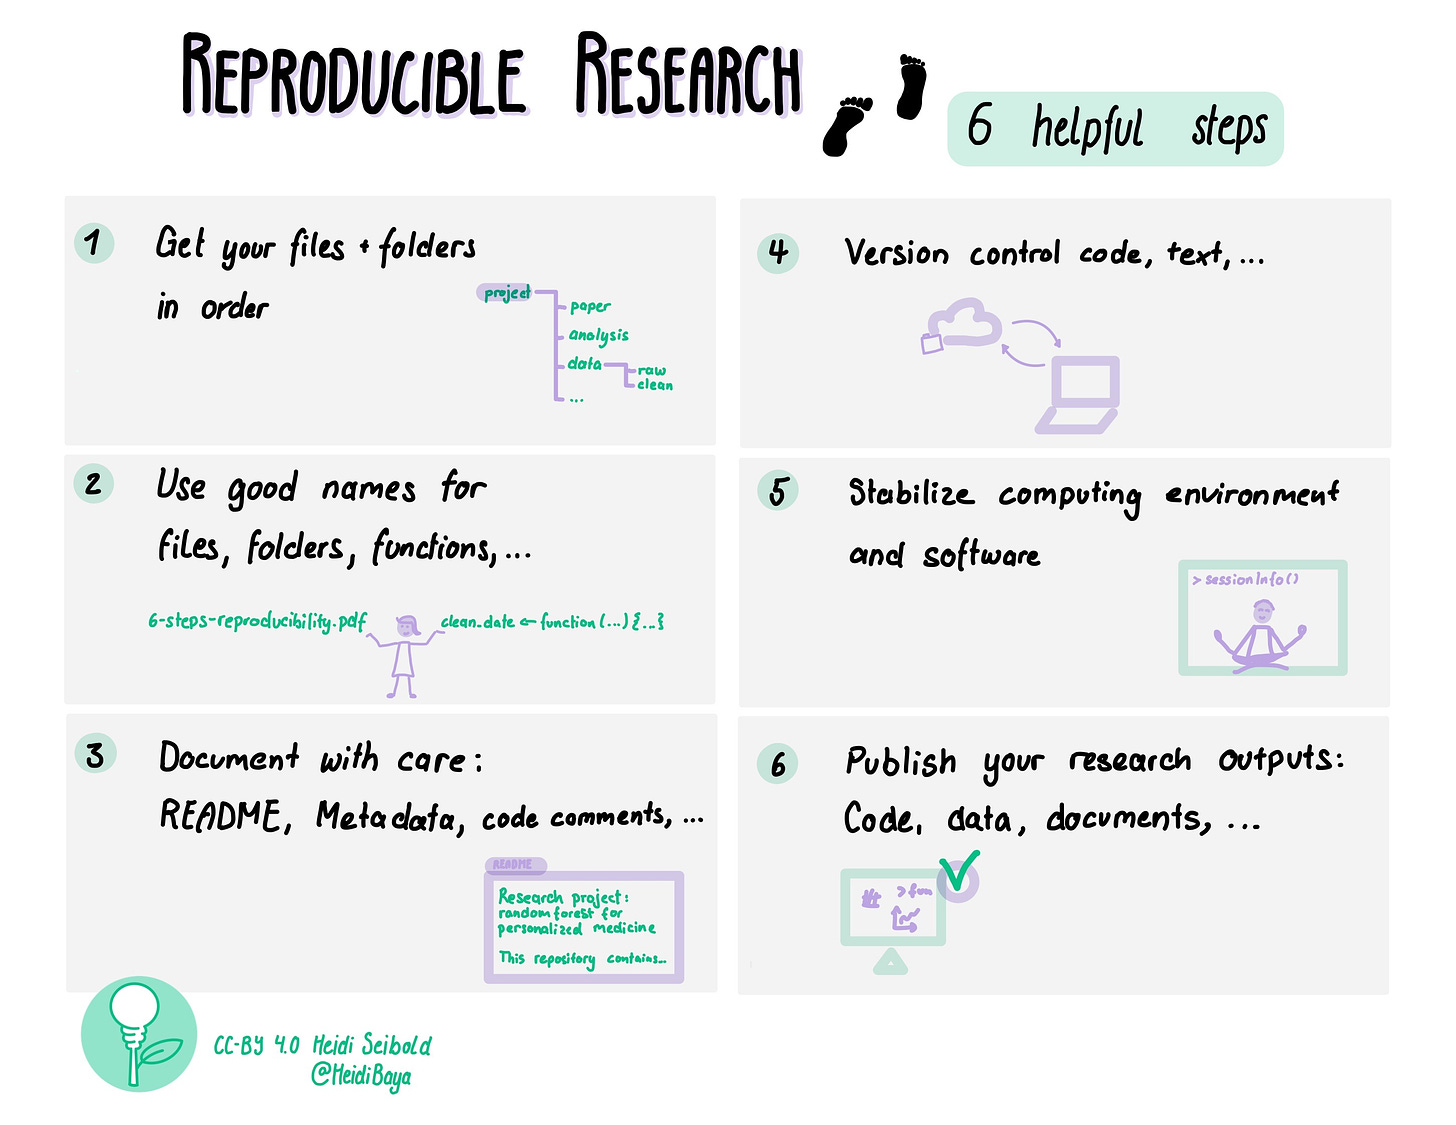 Reproducible Research: 6 helpful steps.  (1) Get your files + folders in order; (2) Use good names for files, folders, functions, …; (3) Document with care: README, Metadata, code comments, …; (4) Version control code, text, …; (5) Stabilize computing environment and software; (6) Publish your research outputs: Code, data, documents, …